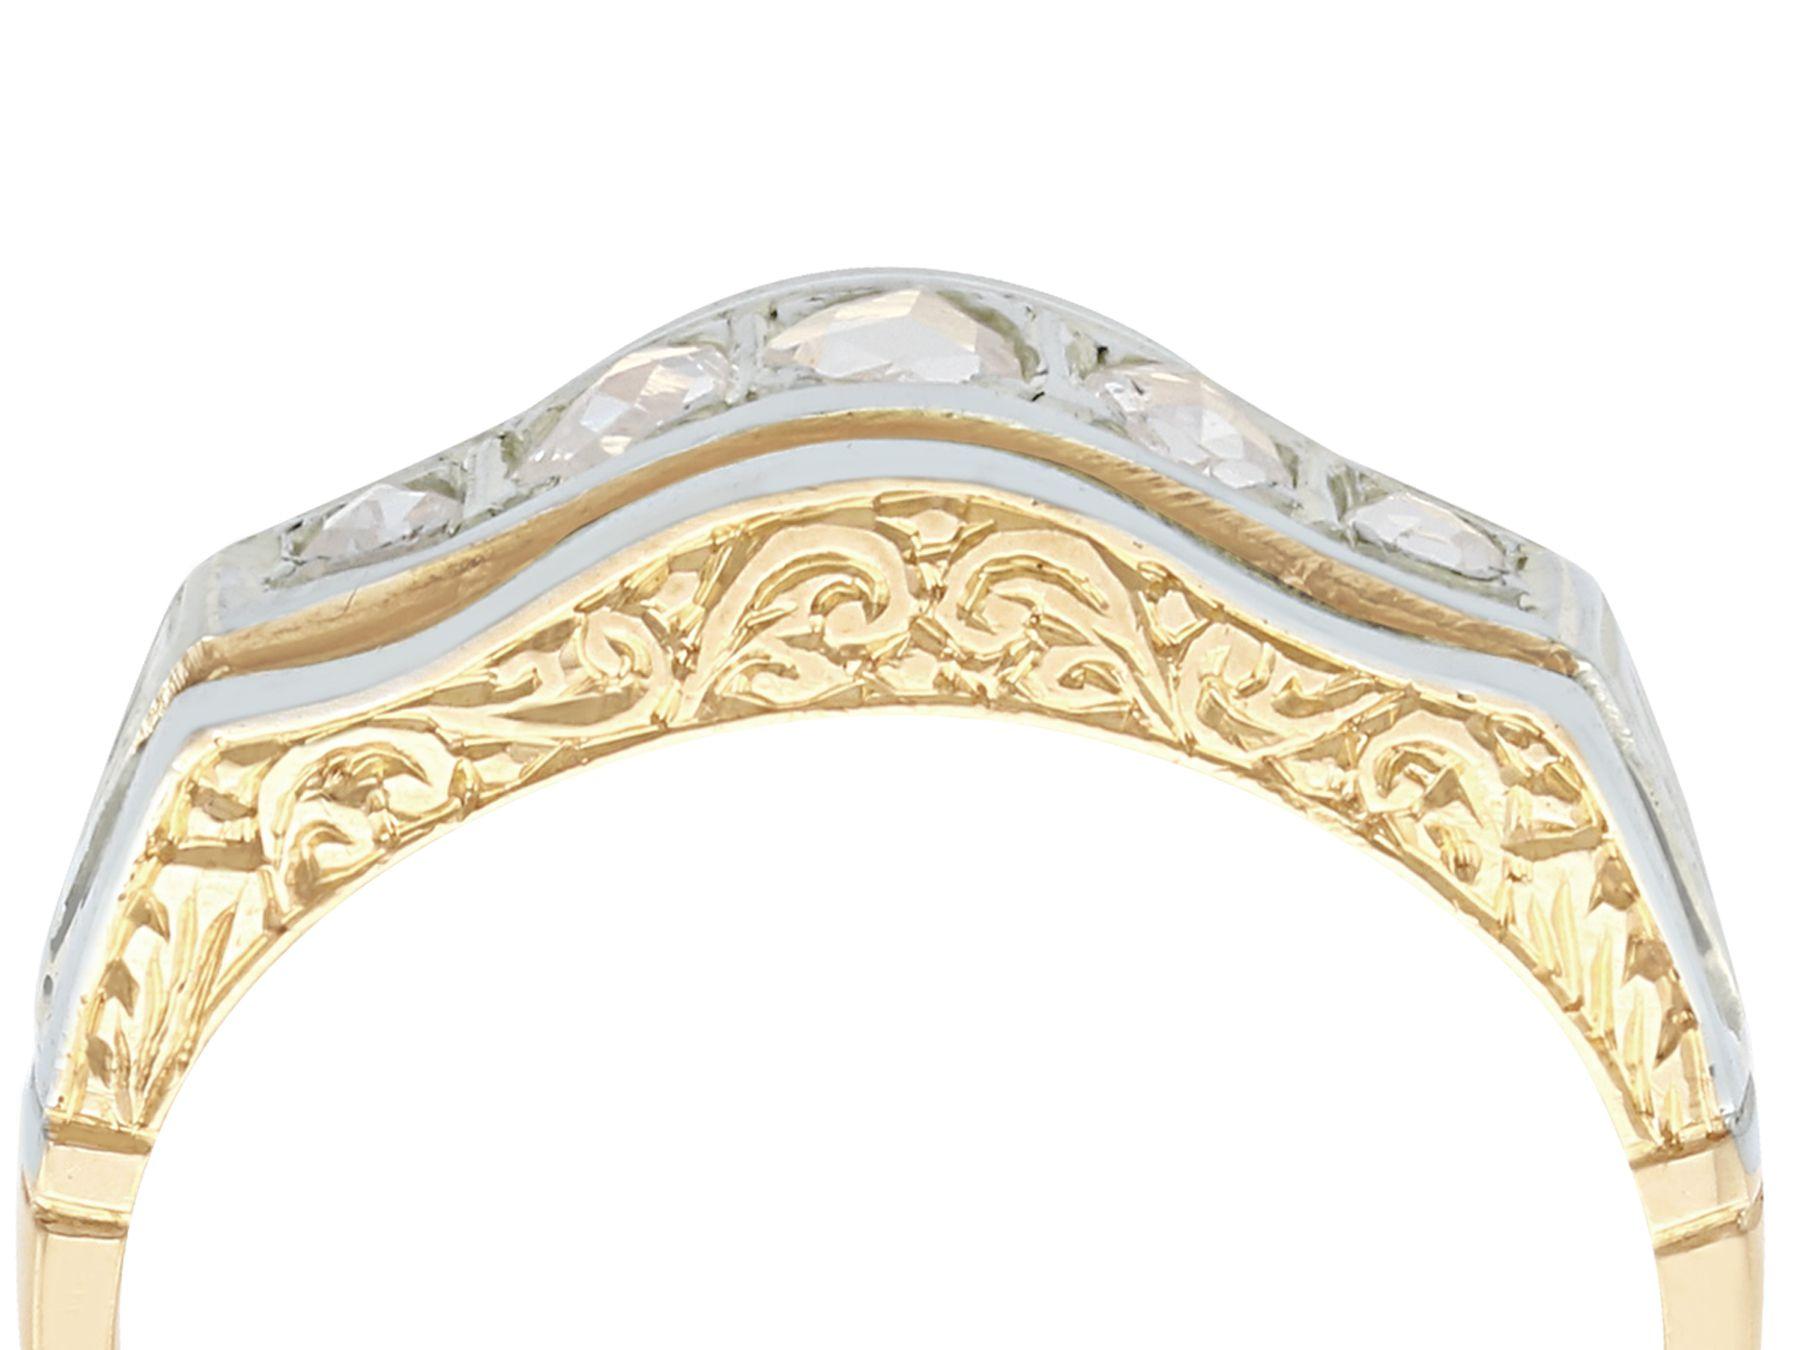 An impressive antique 0.51 carat diamond and 18 karat yellow gold, 18 karat white gold set five stone dress ring; part of our diverse antique jewelry collections

This fine and impressive five stone diamond band ring has been crafted in 18k yellow